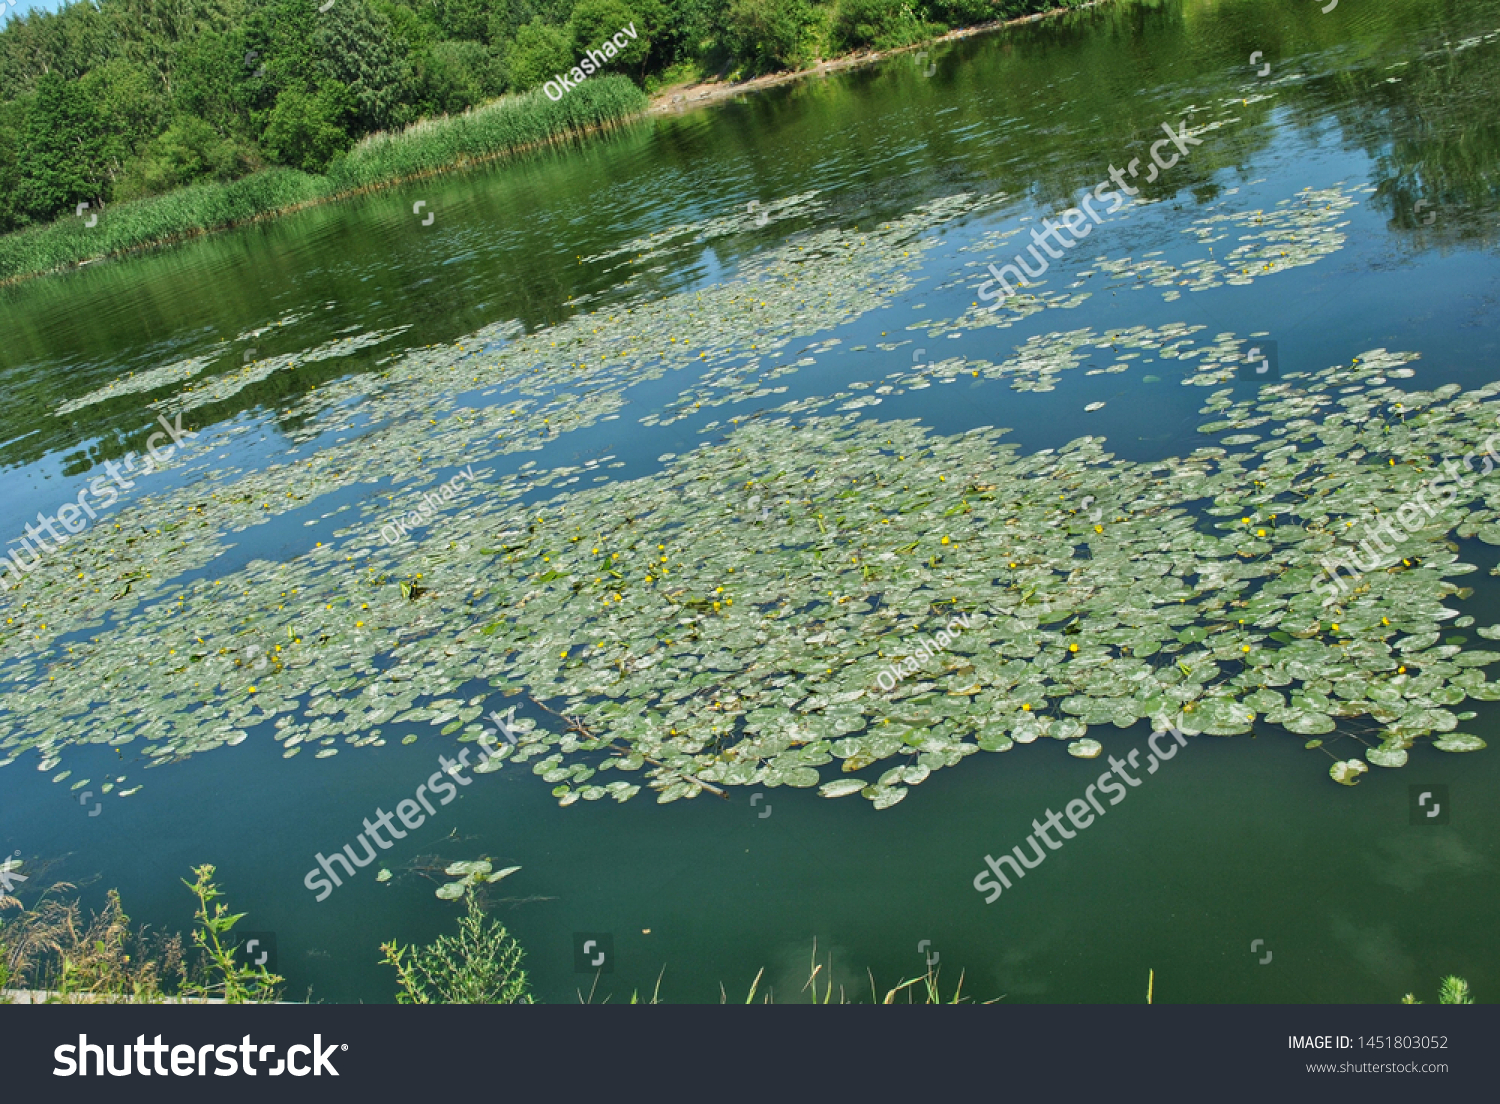 Water lilies on the water, river, reservoir, lake #1451803052